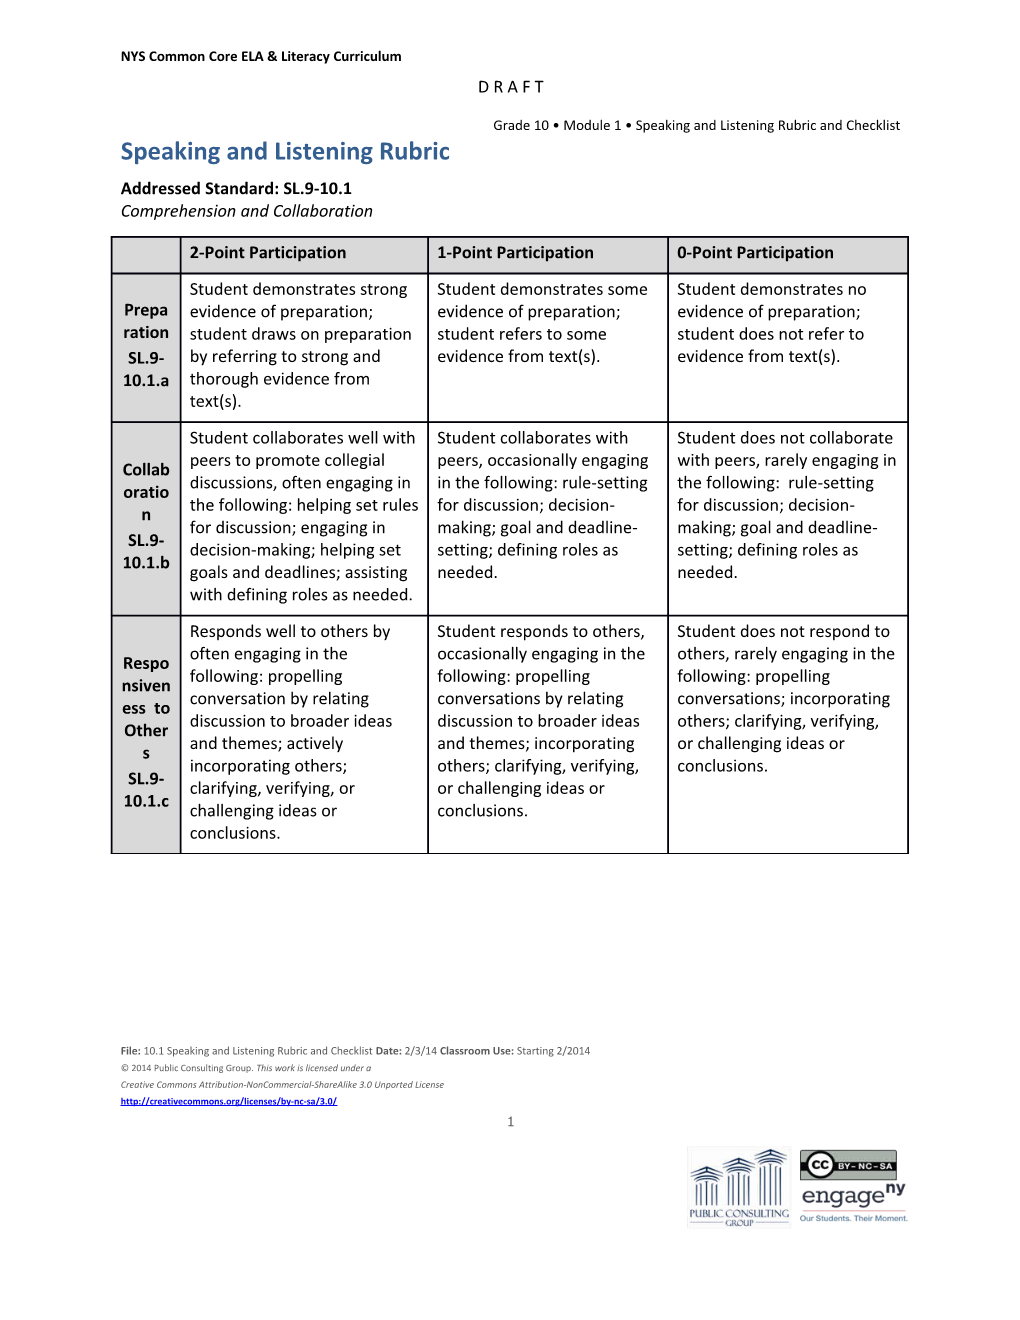 Speaking and Listening Rubric